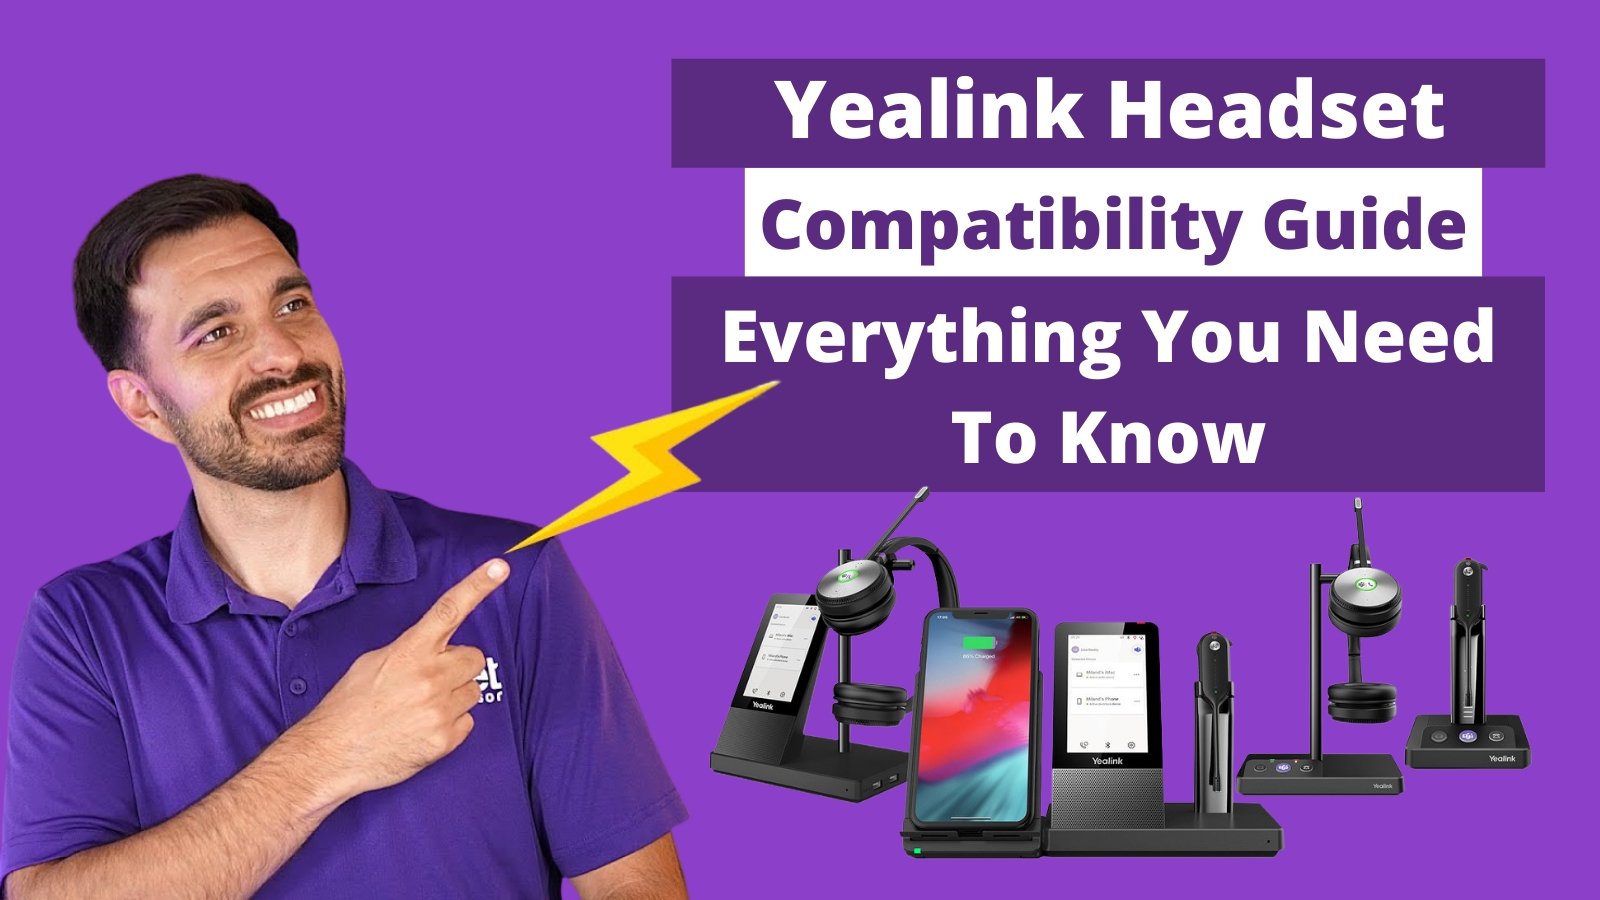 Yealink Headset Compatibility Guide: Everything You Need To Know - Headset Advisor